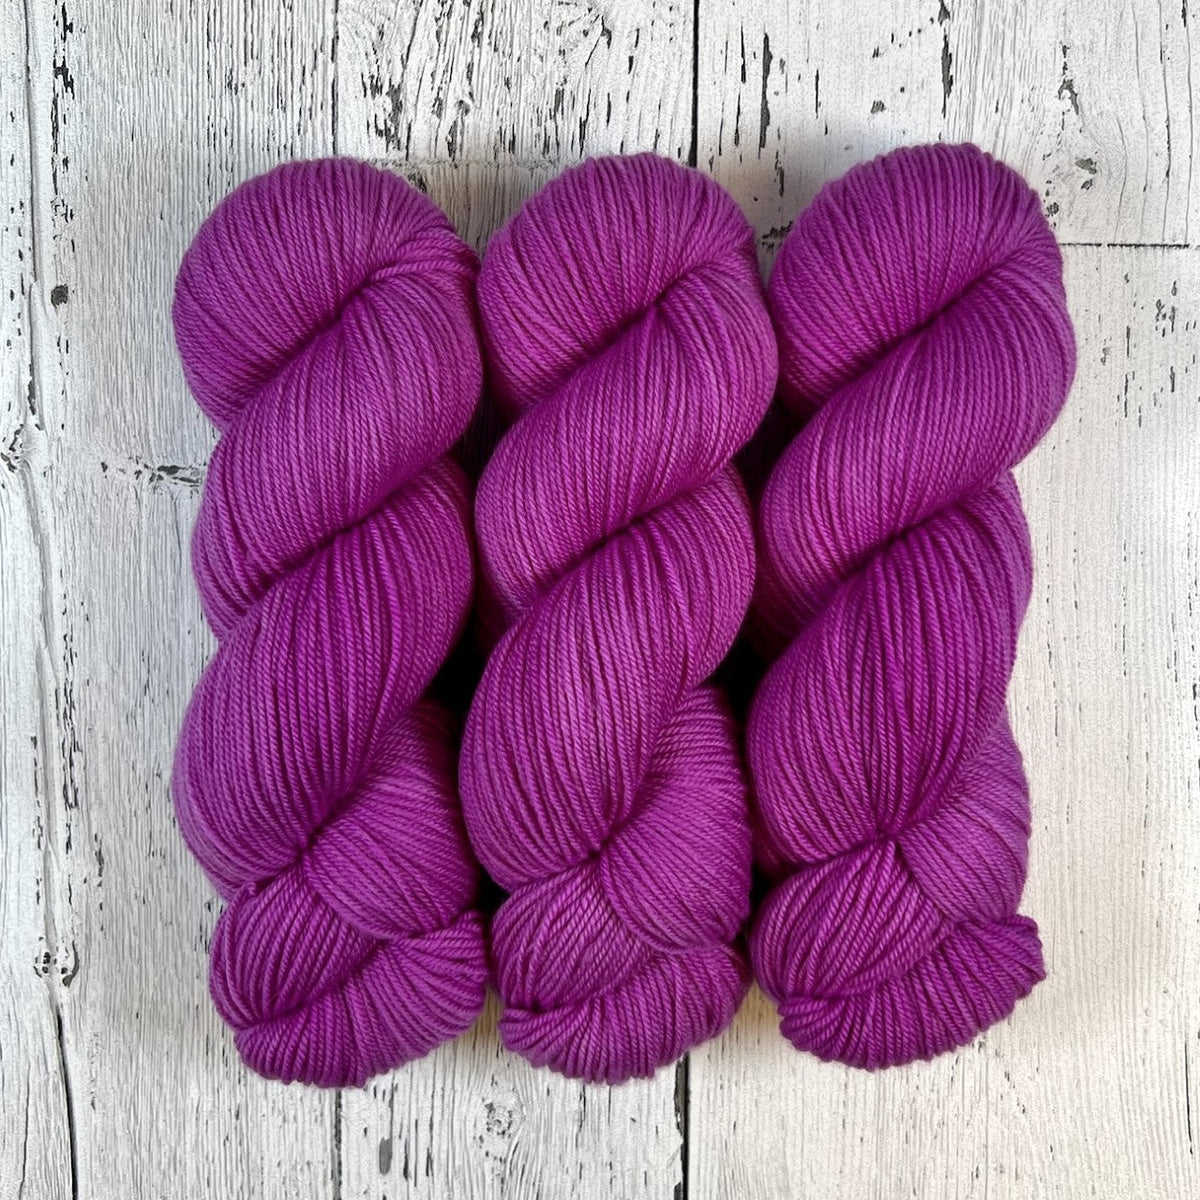 Clematis - Merino DK / Light Worsted - Dyed Stock